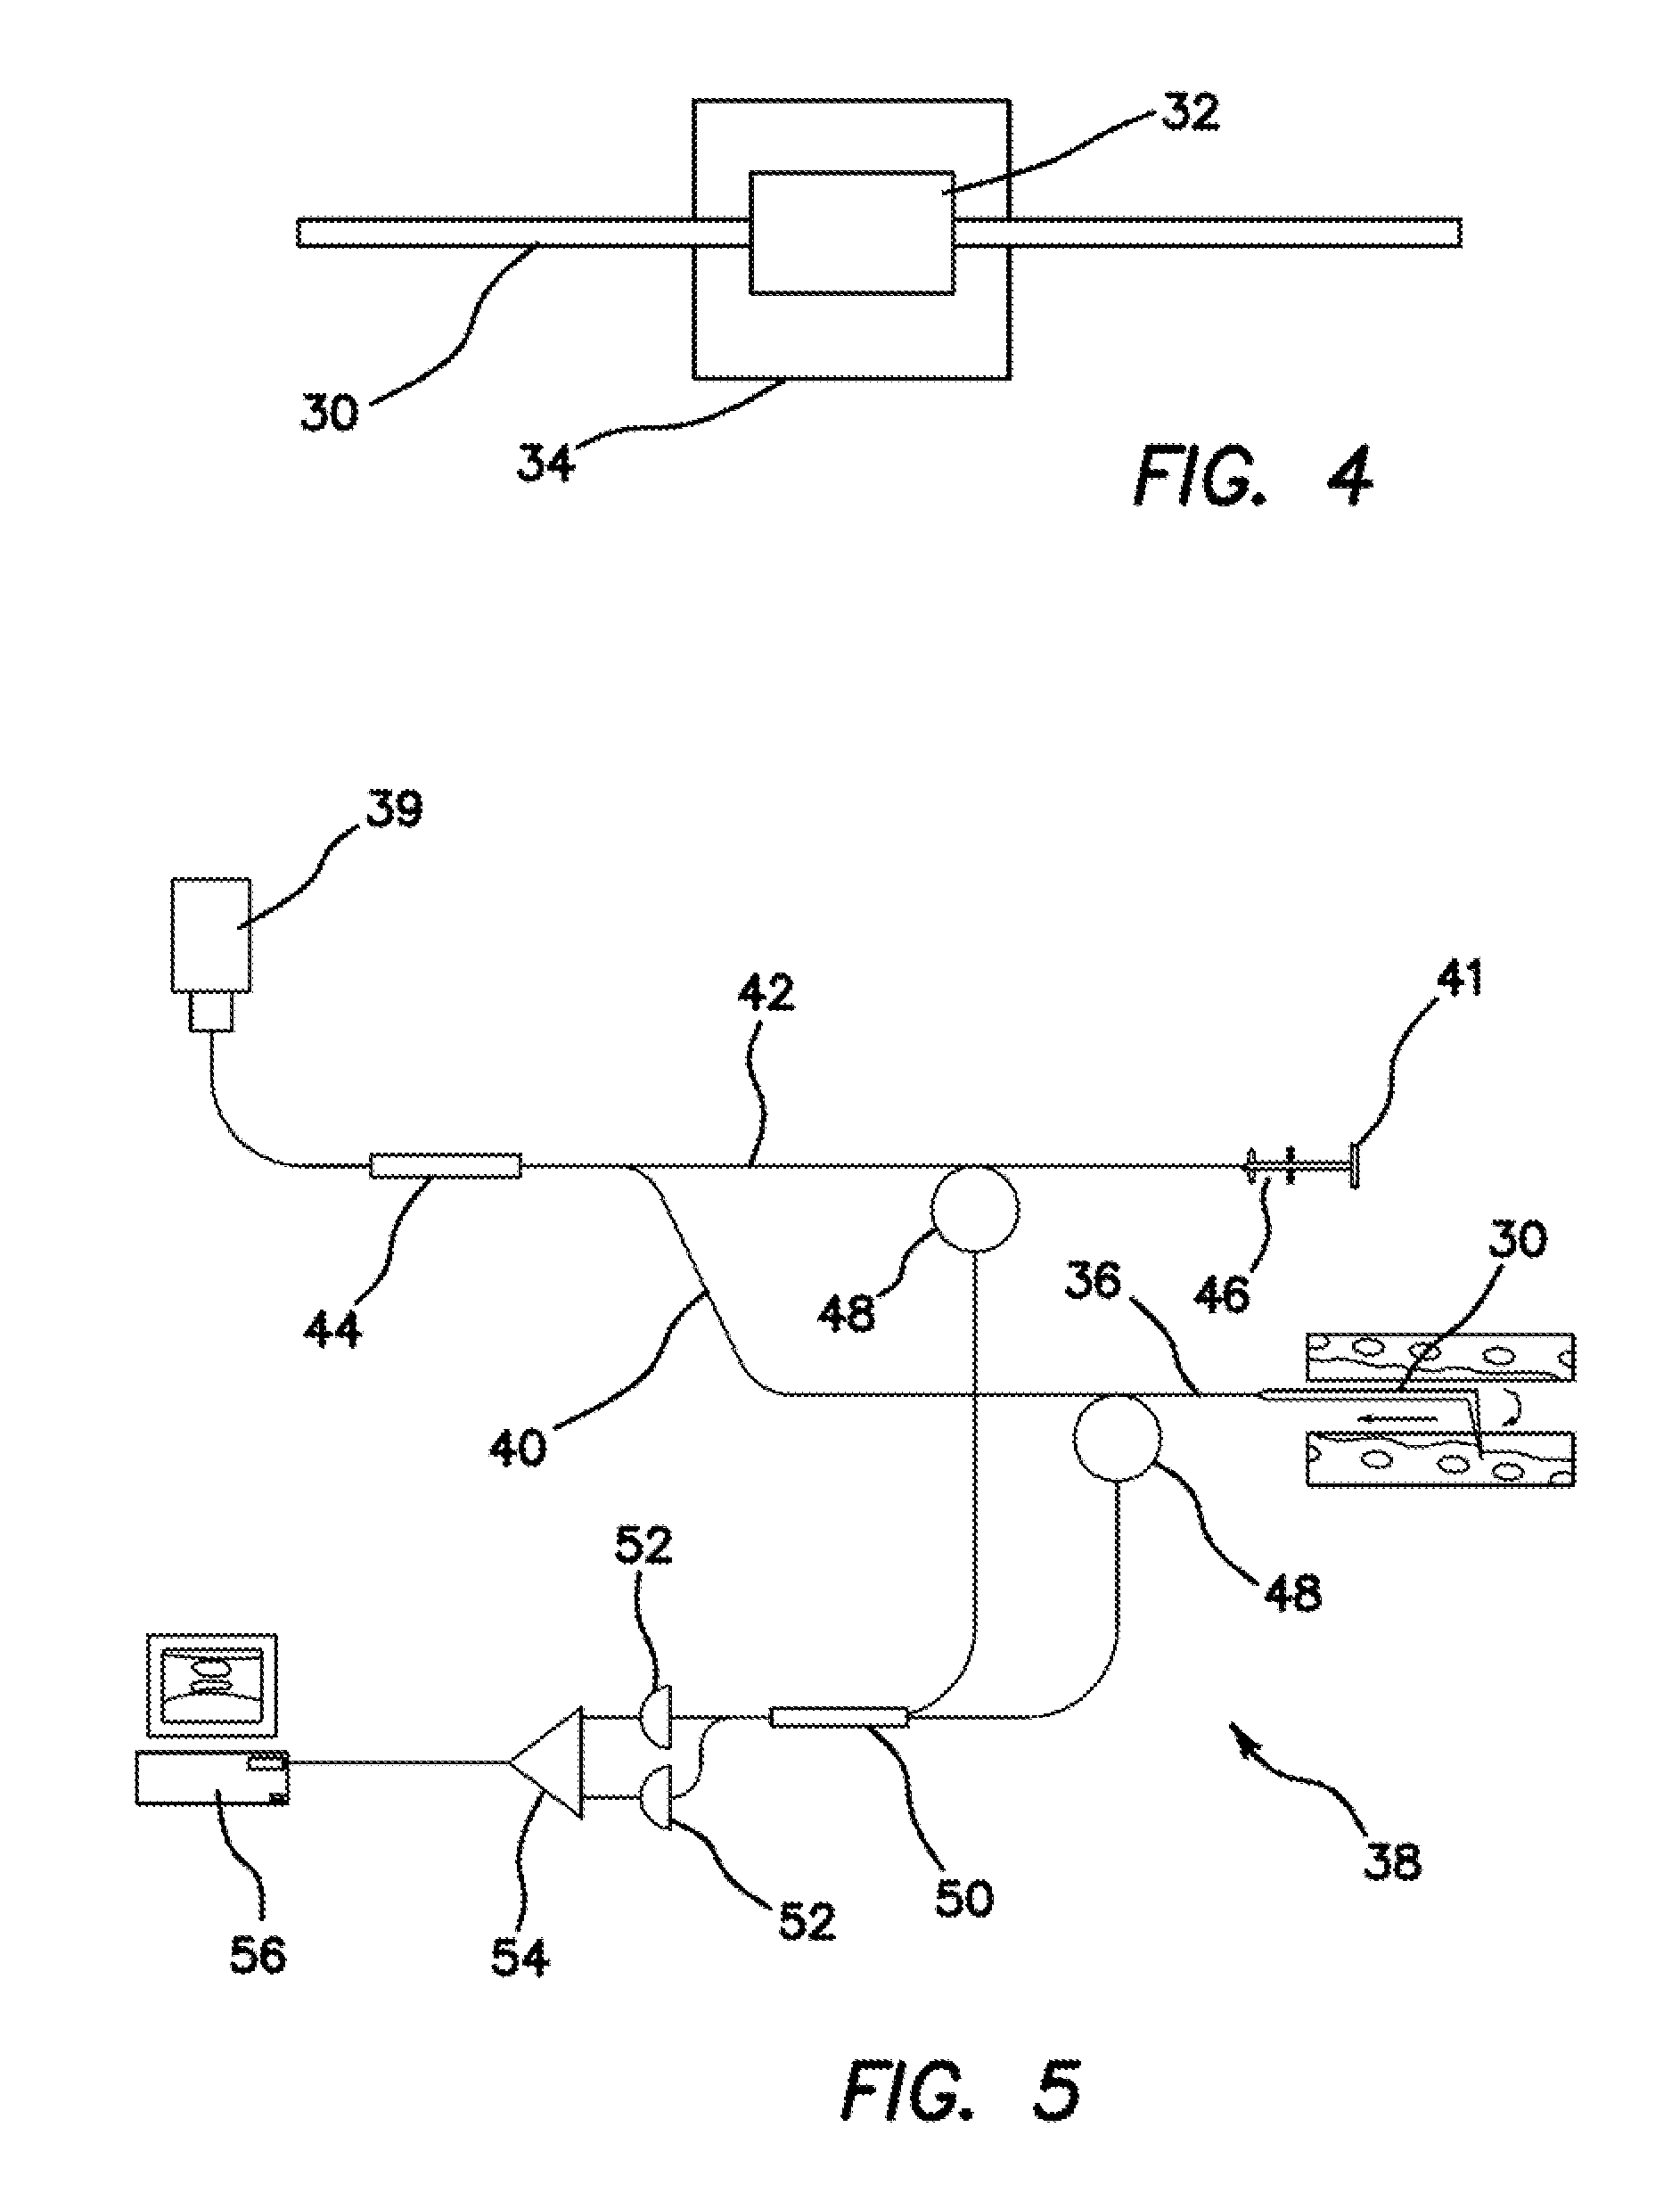 Endovascular Optical Coherence Tomography Device